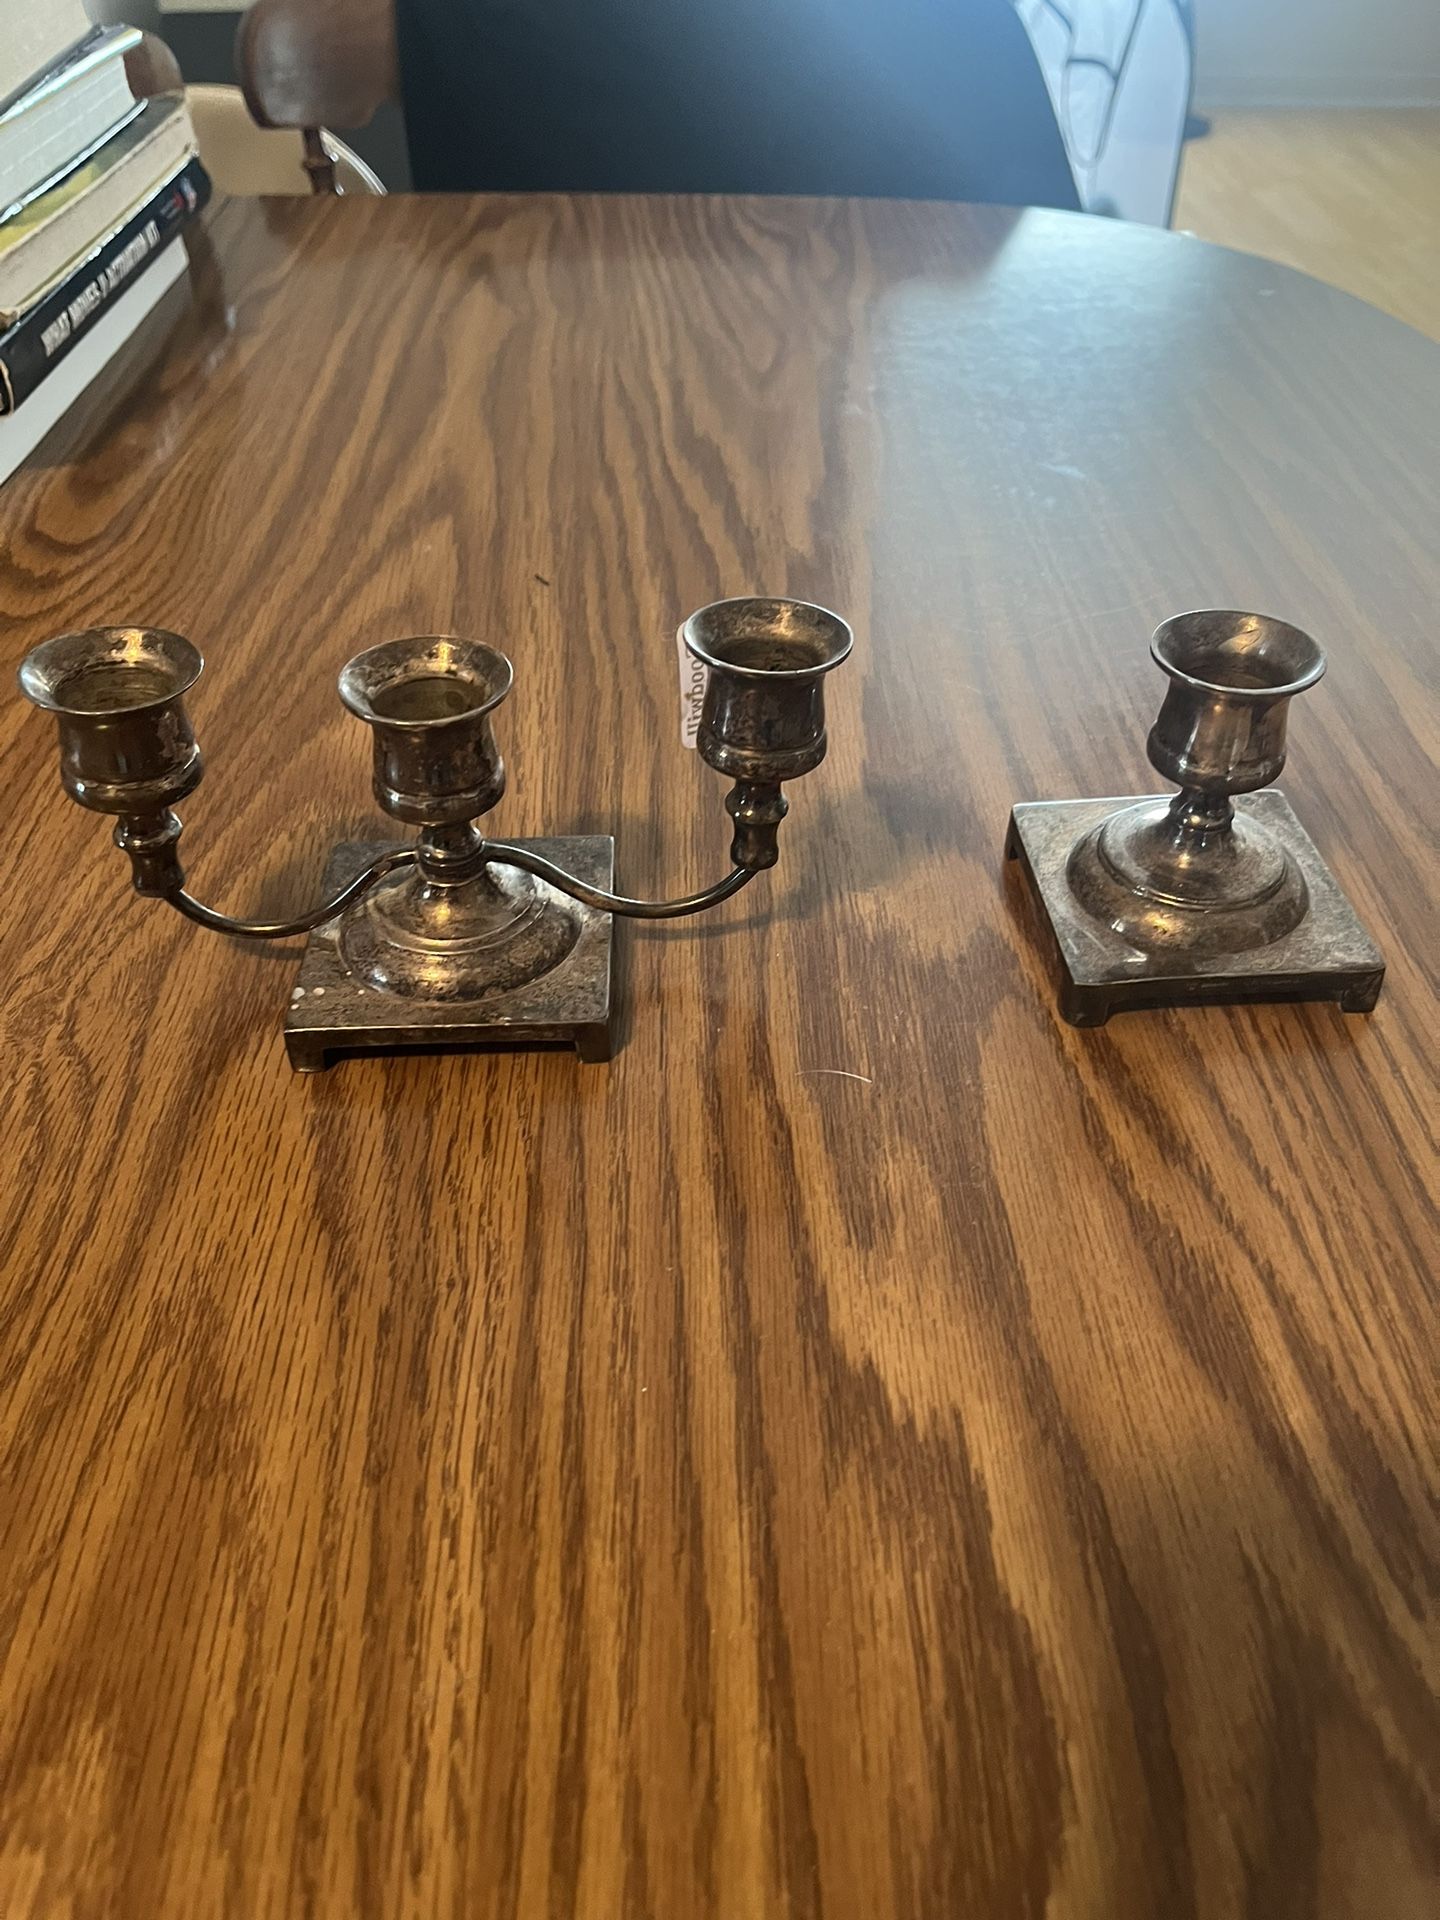 Candle Holders For Sale